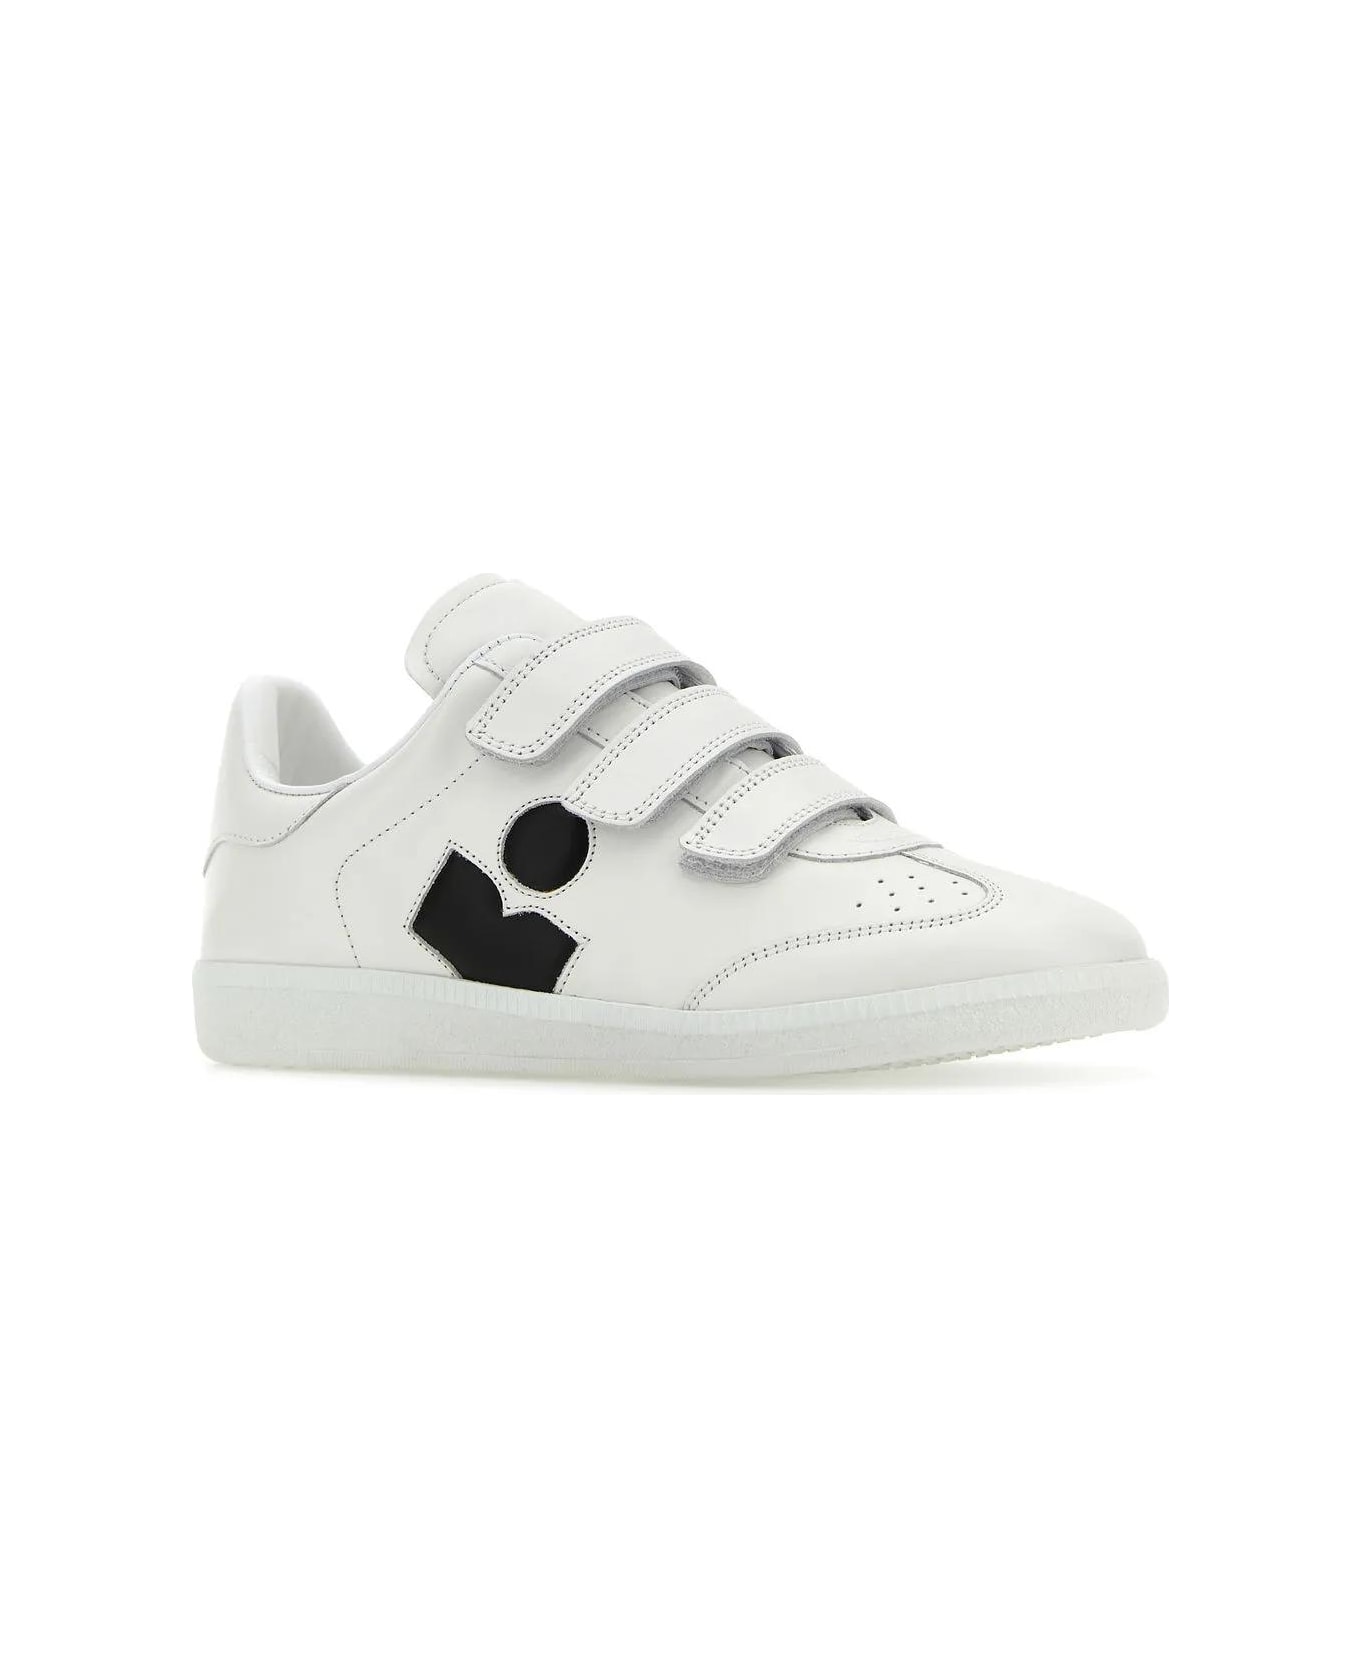 Isabel Marant White Leather Logo Classic Sn Sneakers - White スニーカー